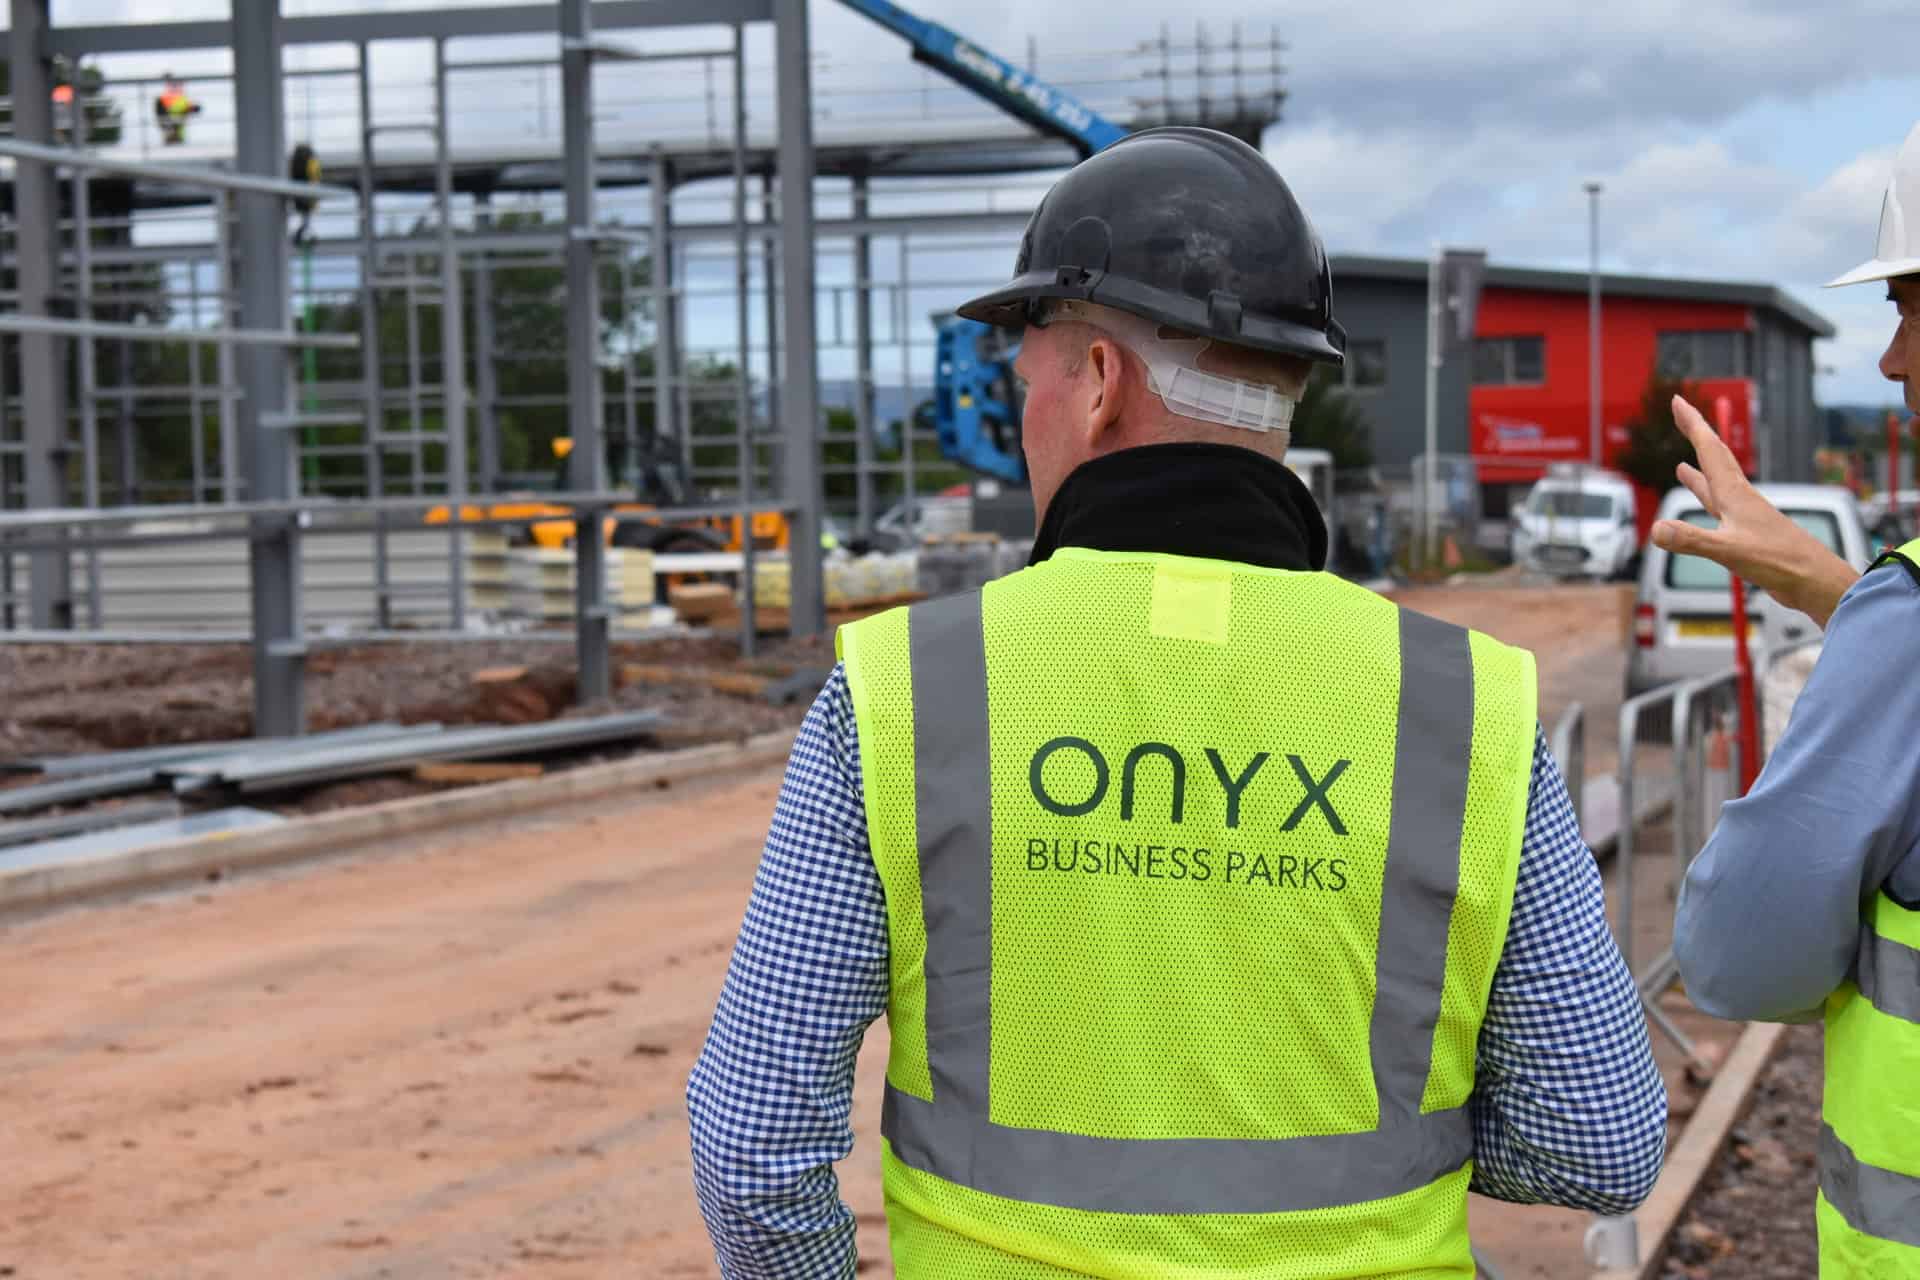 Onyx team member at the West Park, Wellington construction site, wearing a high-visibility vest featuring 'Onyx.' The site showcases progress with steel beams in place, signalling the advancement of the development phase.